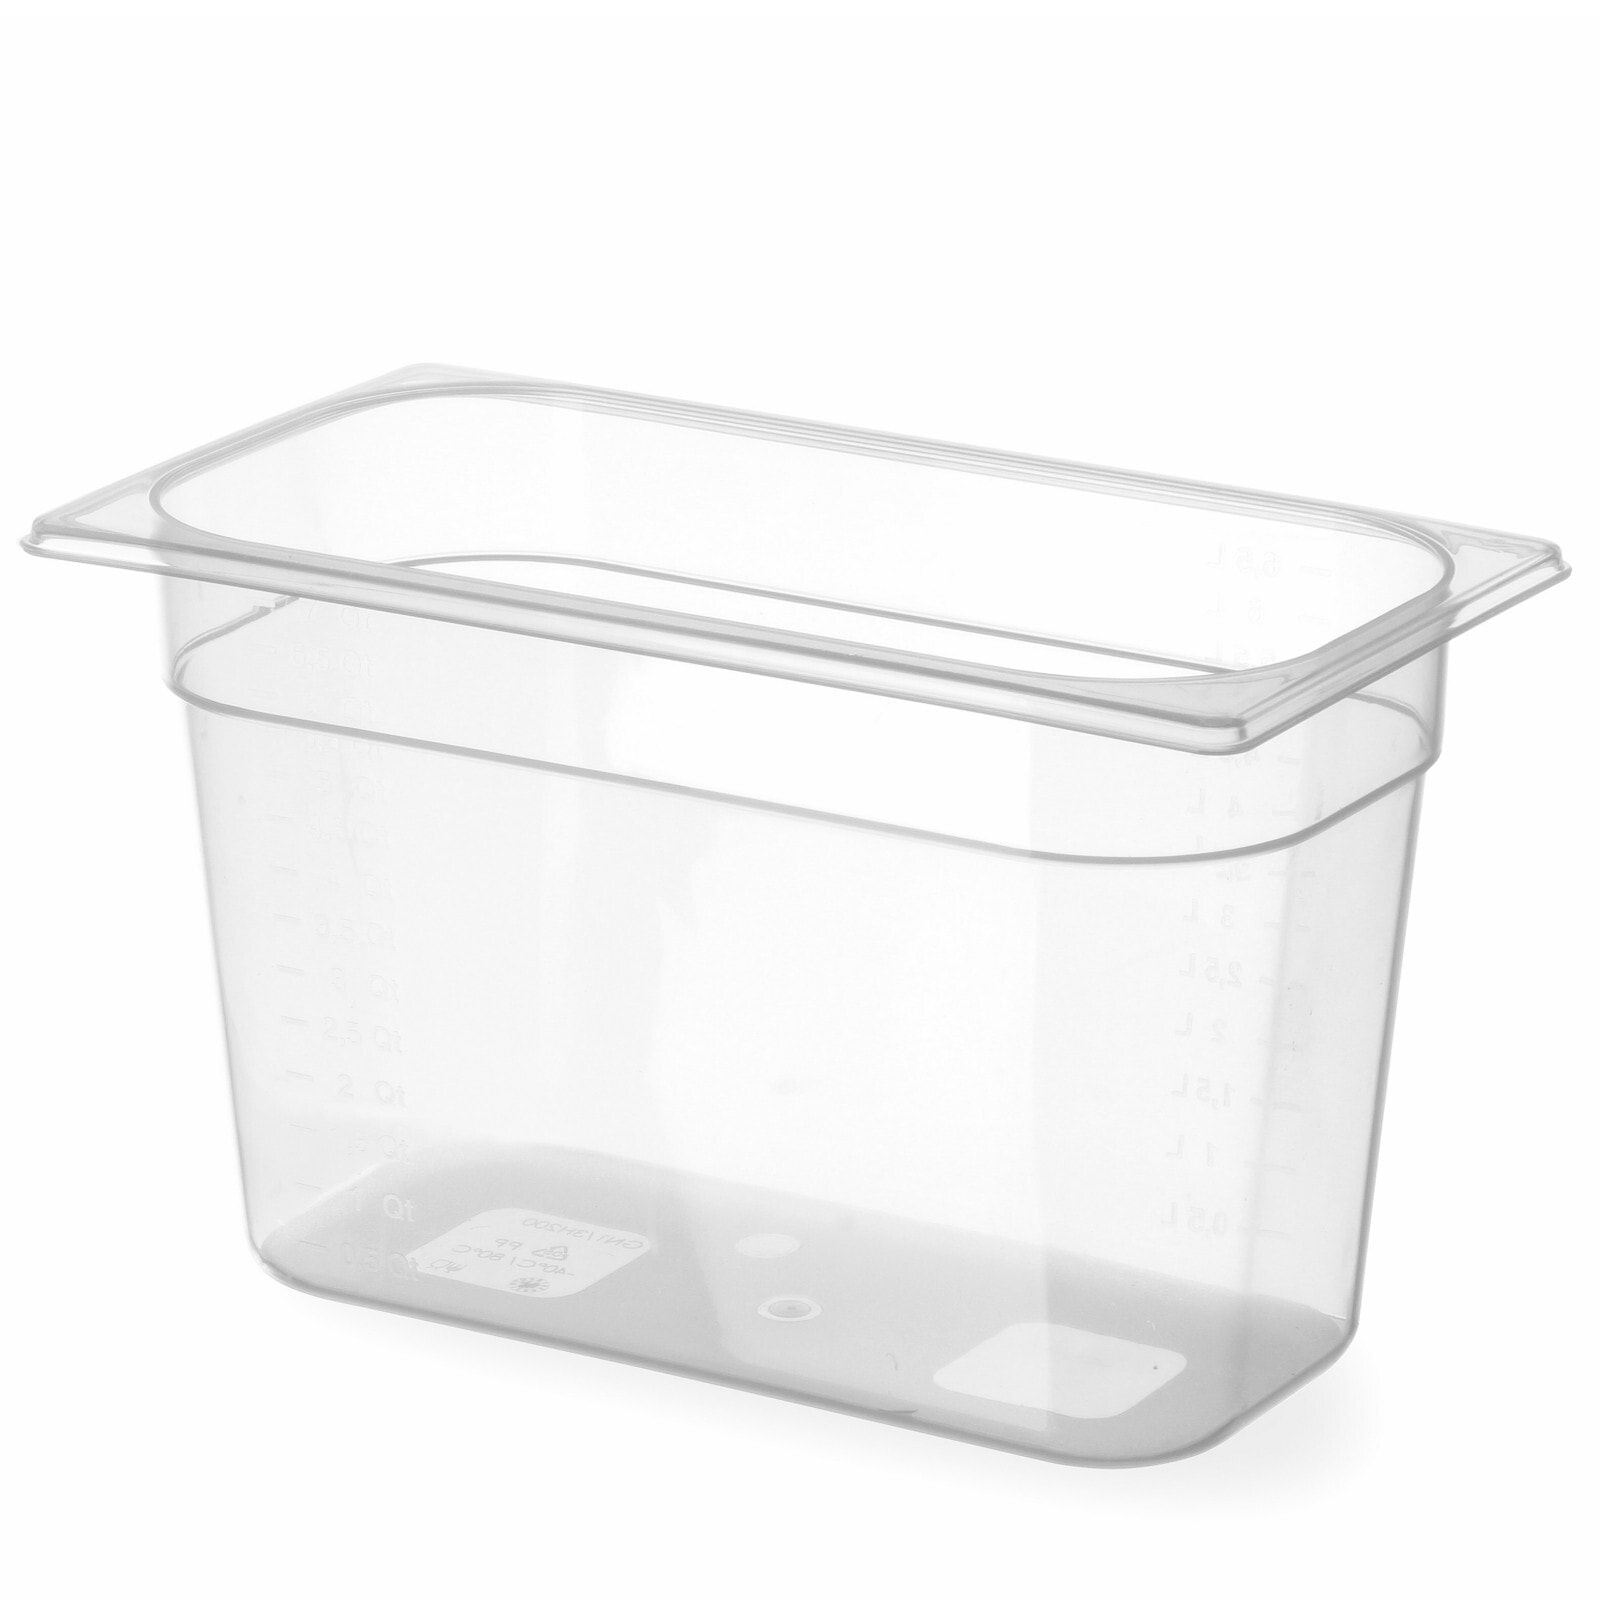 Gastronomy container made of polypropylene GN 1/3, height 150 mm - Hendi 880210